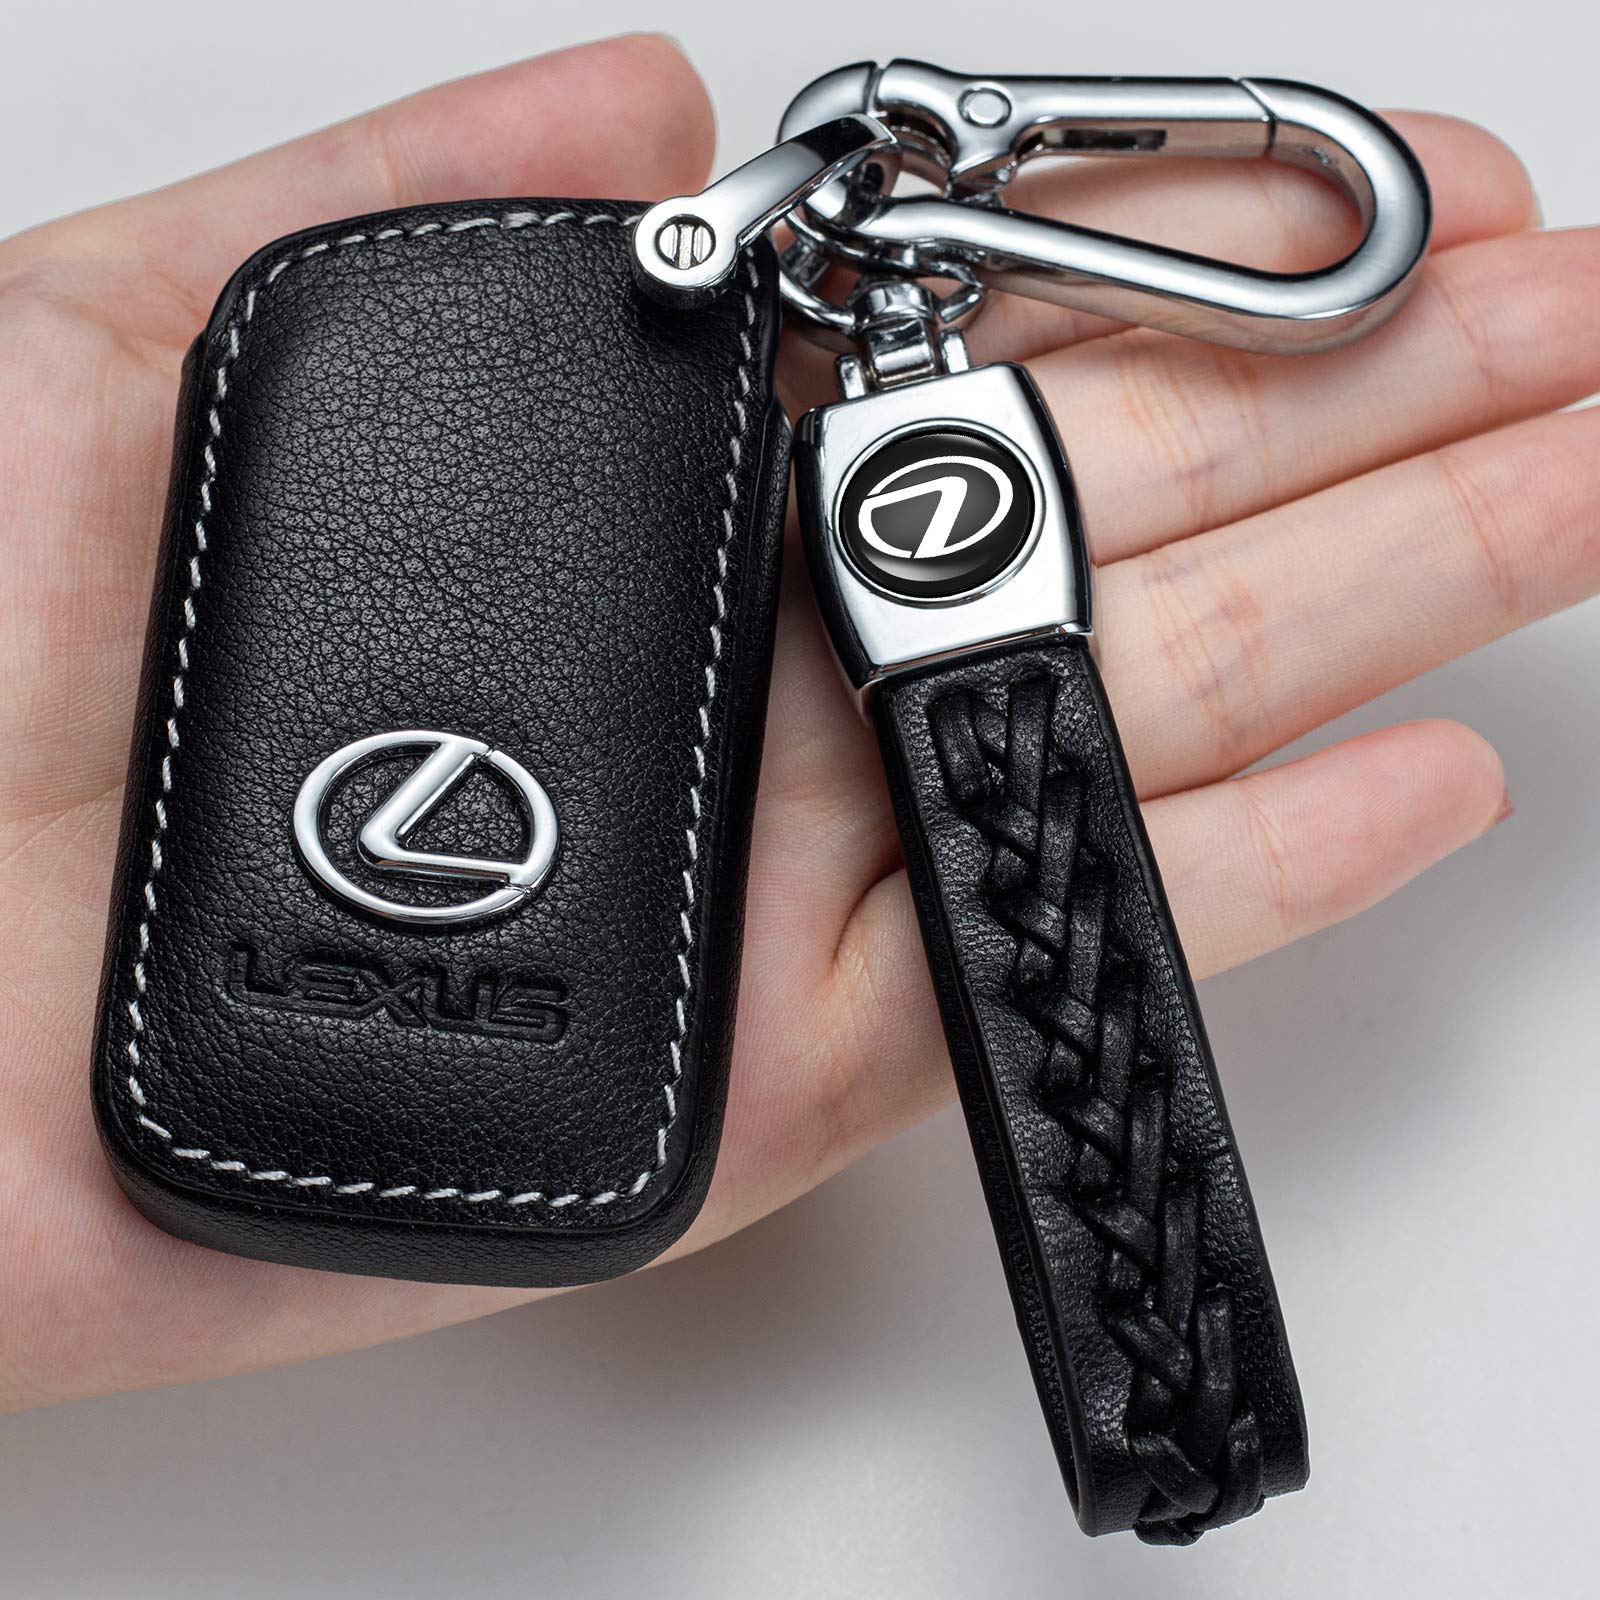 Leather Key Case Key fob Holder,Key fob Cover Replacement for 2013-2021  Lexus ES300h ES350 GS350 GS450h IS200t IS300 IS350 LX570 NX200t NX300h  RC350